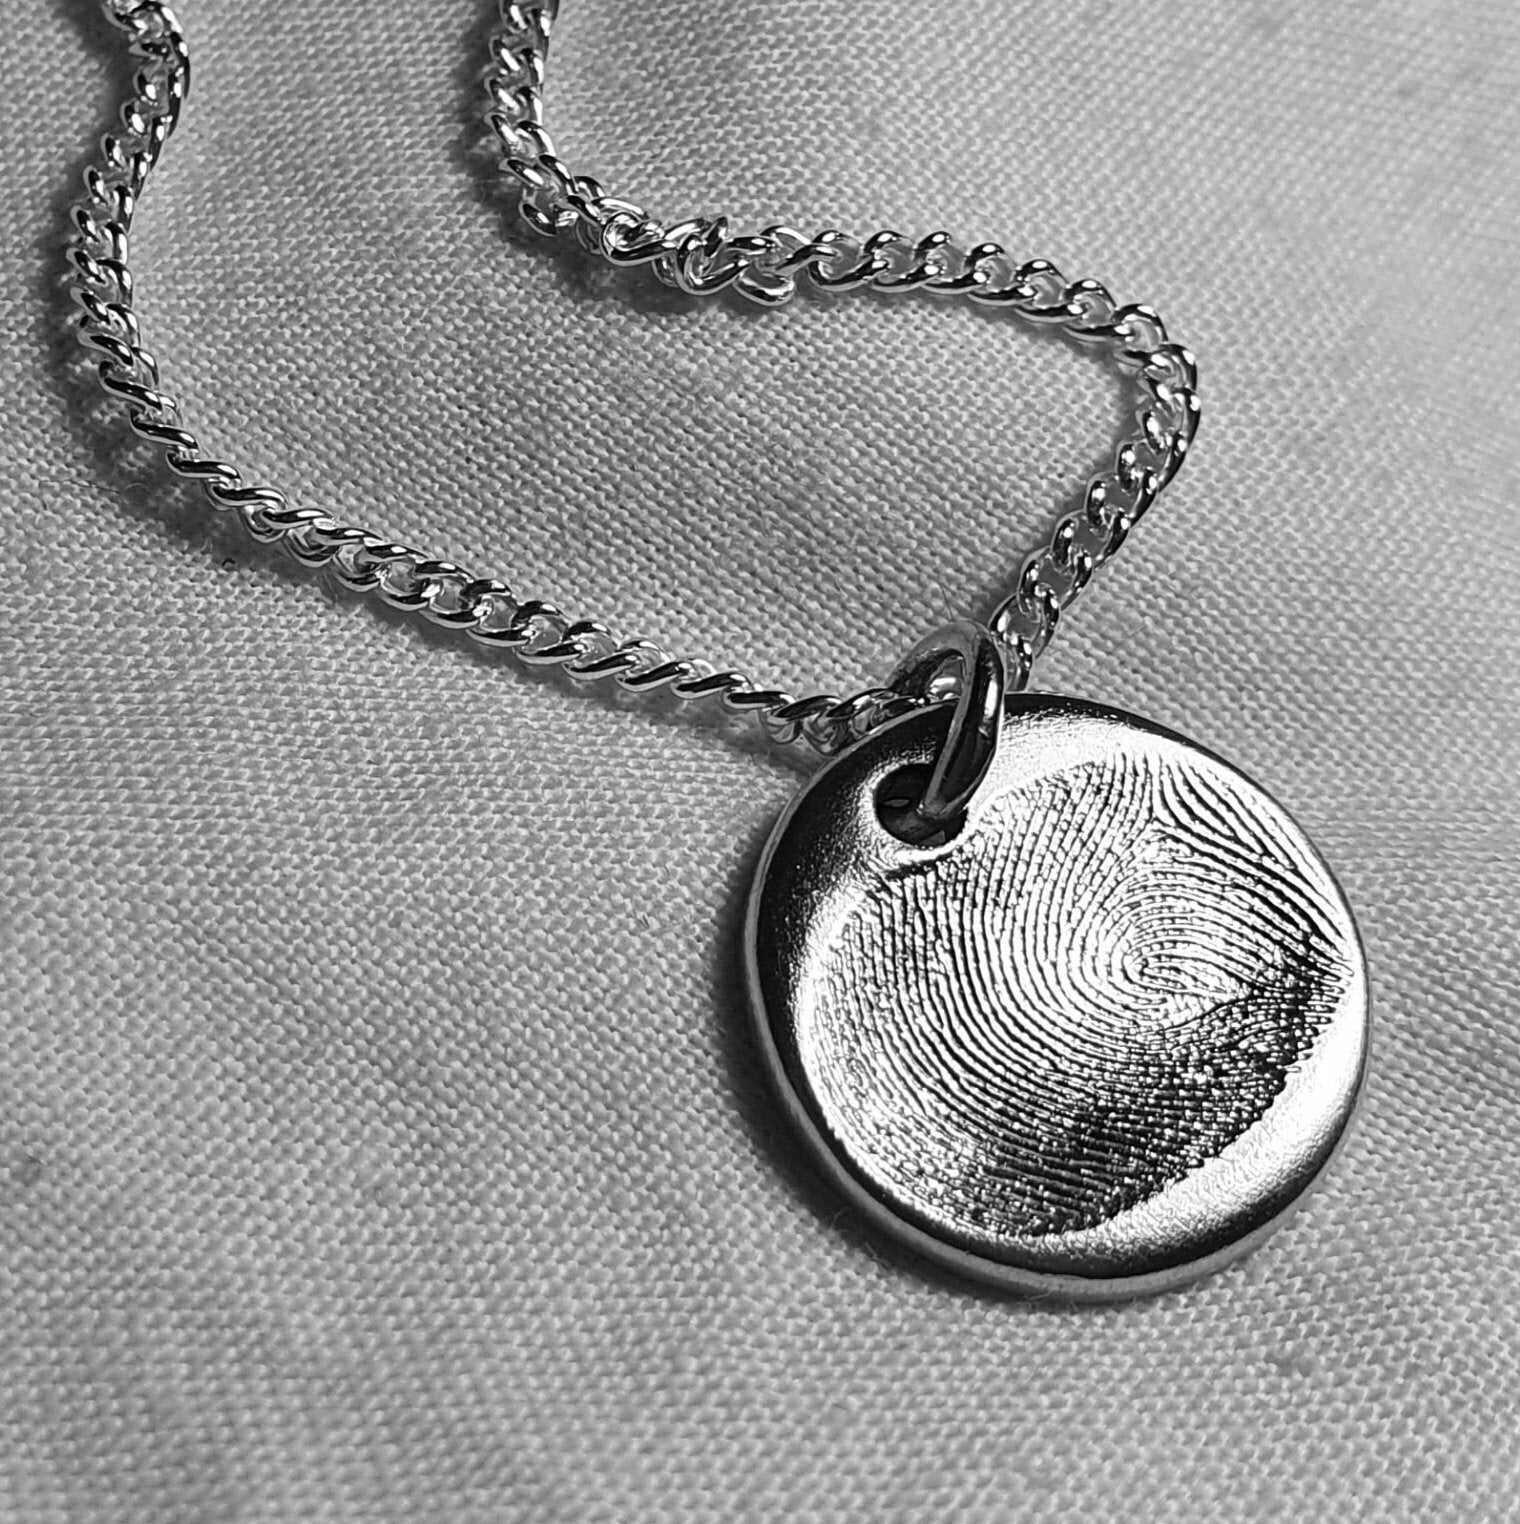 Fingerprint Necklace Pendant - Fingerprint Jewellery Thumbprint Jewelry Personalized Necklace Gifts For Mom & Grandma